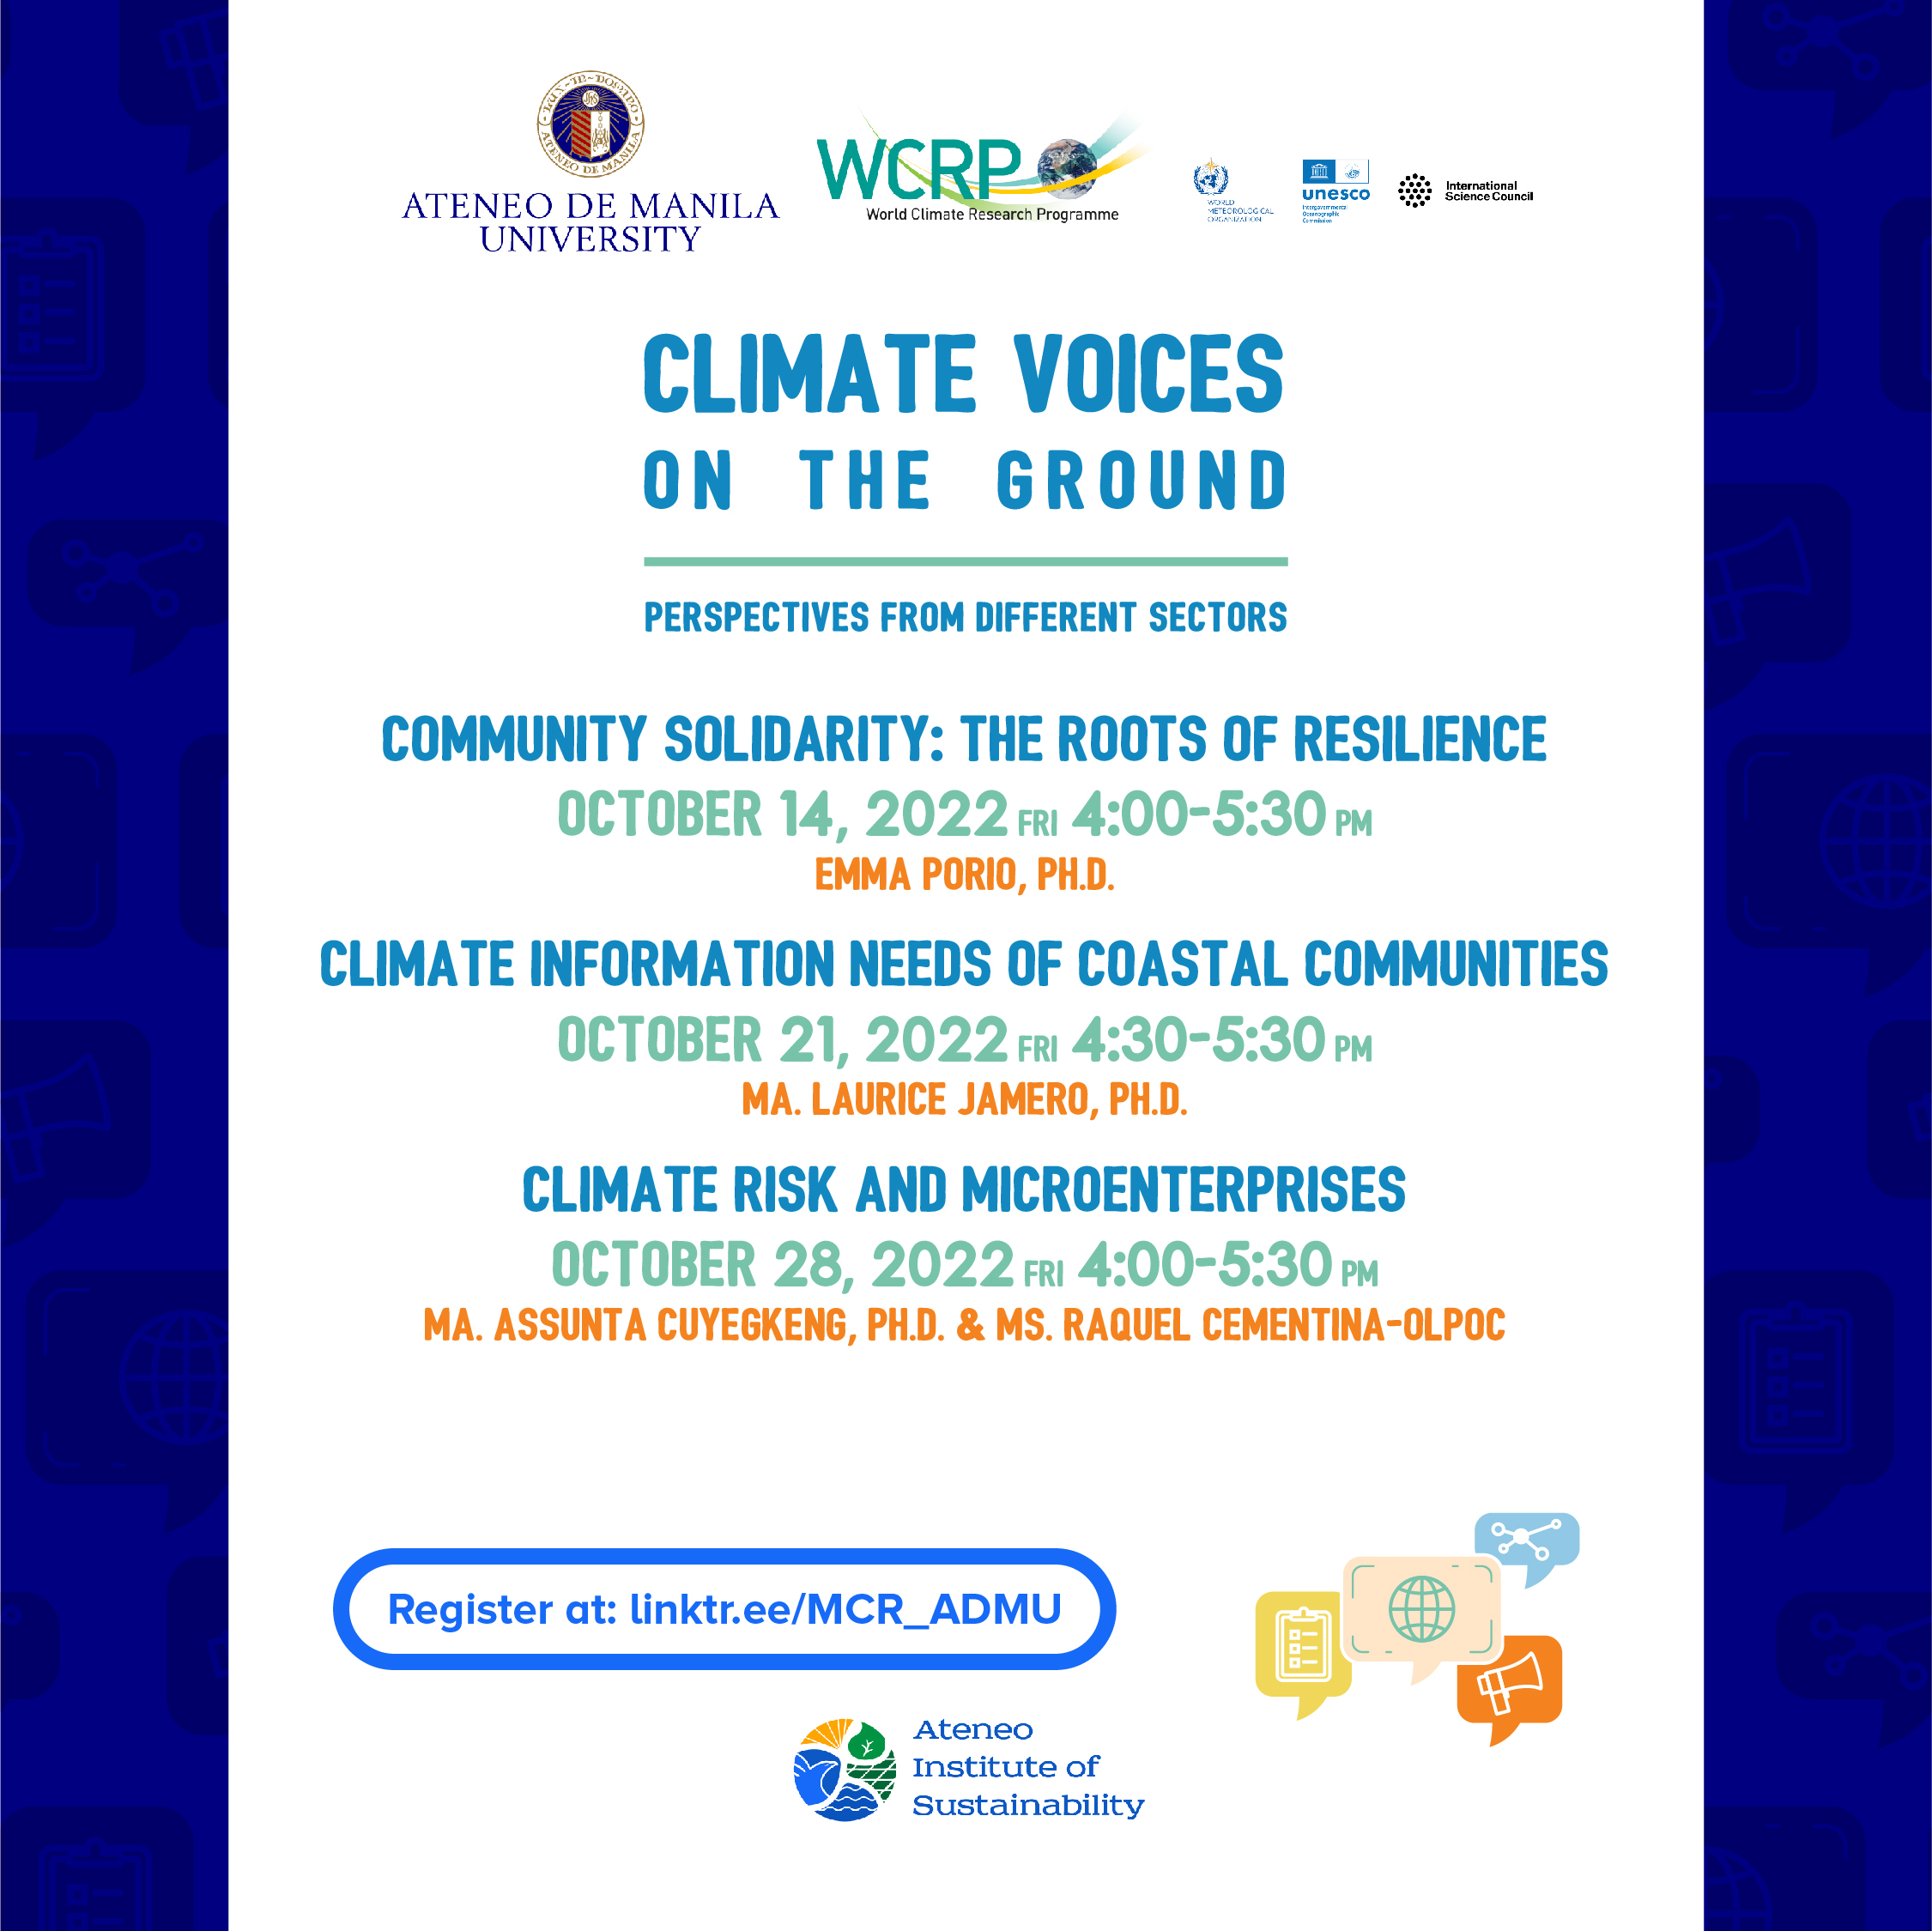 "Climate Voices on the Ground: Perspectives from Different Sectors", a Webinar Series